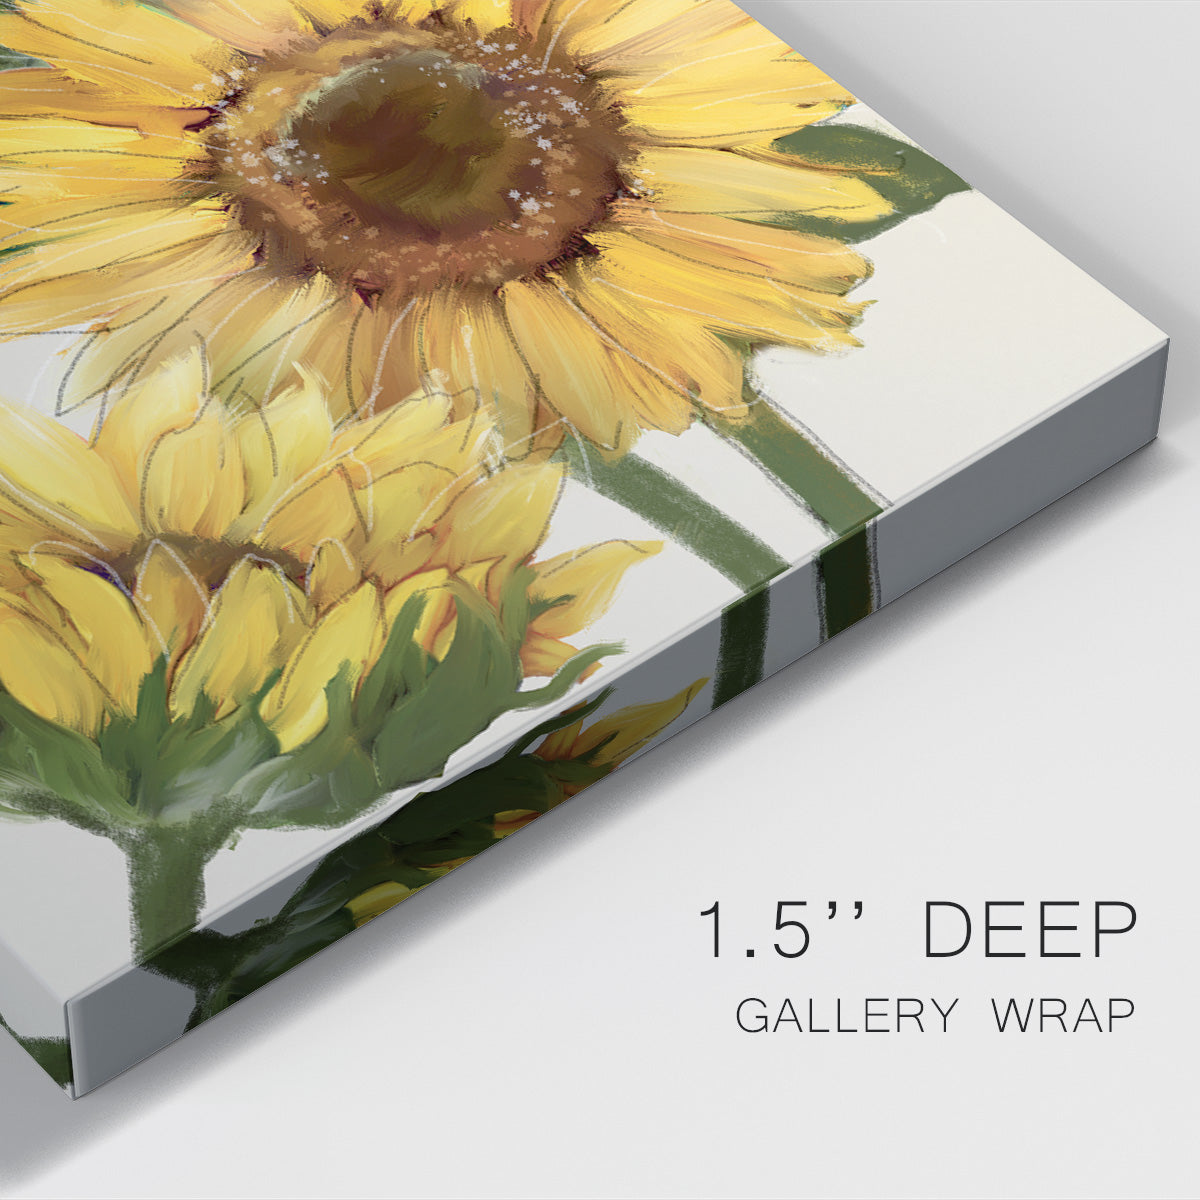 Fresh Picked Sunflowers Premium Gallery Wrapped Canvas - Ready to Hang